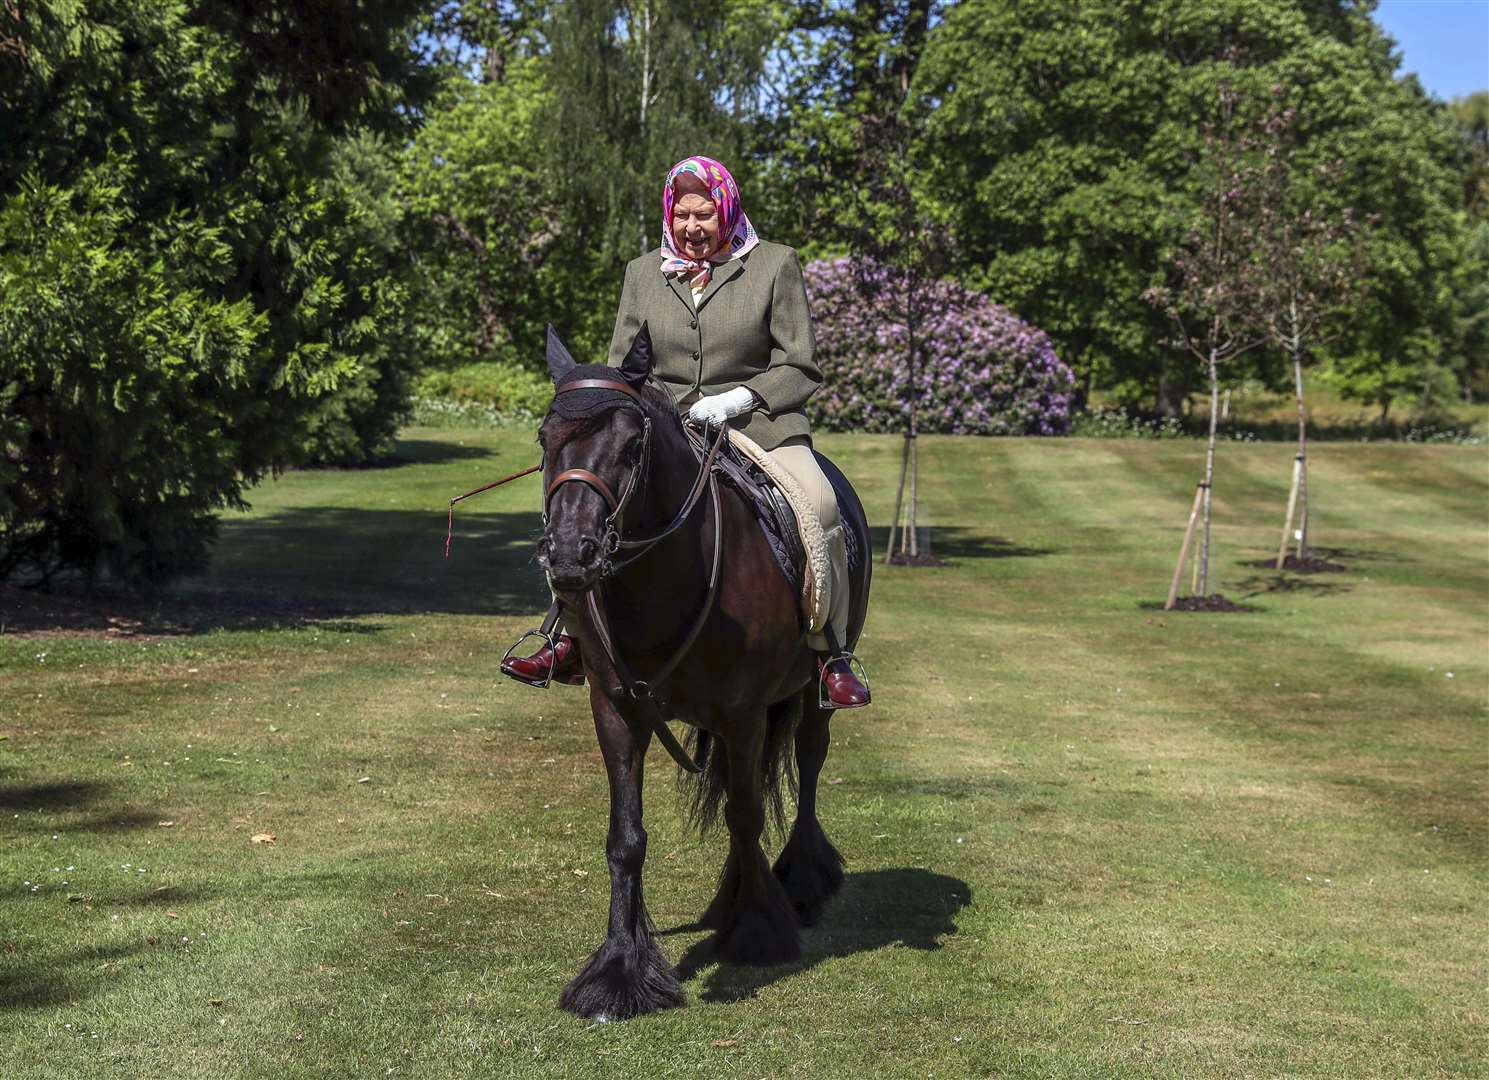 The Queen enjoyed horse riding well into her nineties (Steve Parsons/PA)